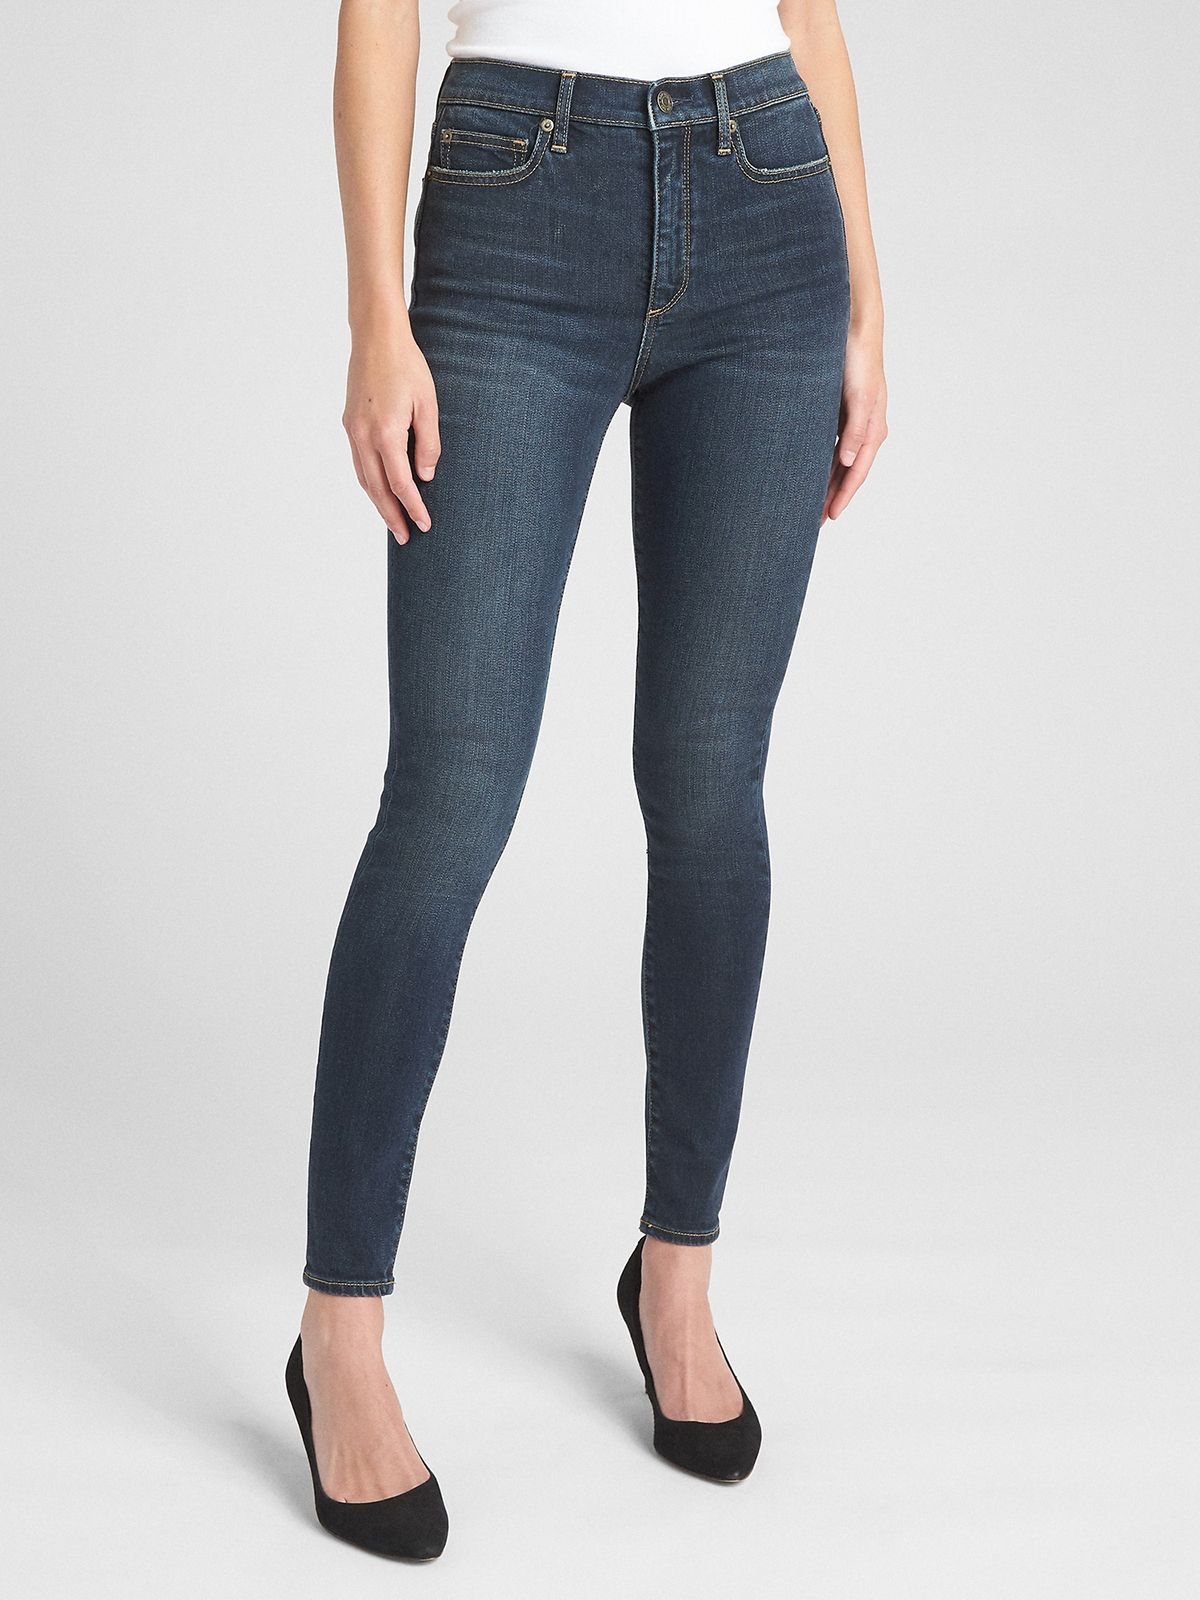 Sarah Jessica Parker Wore Gap Skinny Jeans | Who What Wear